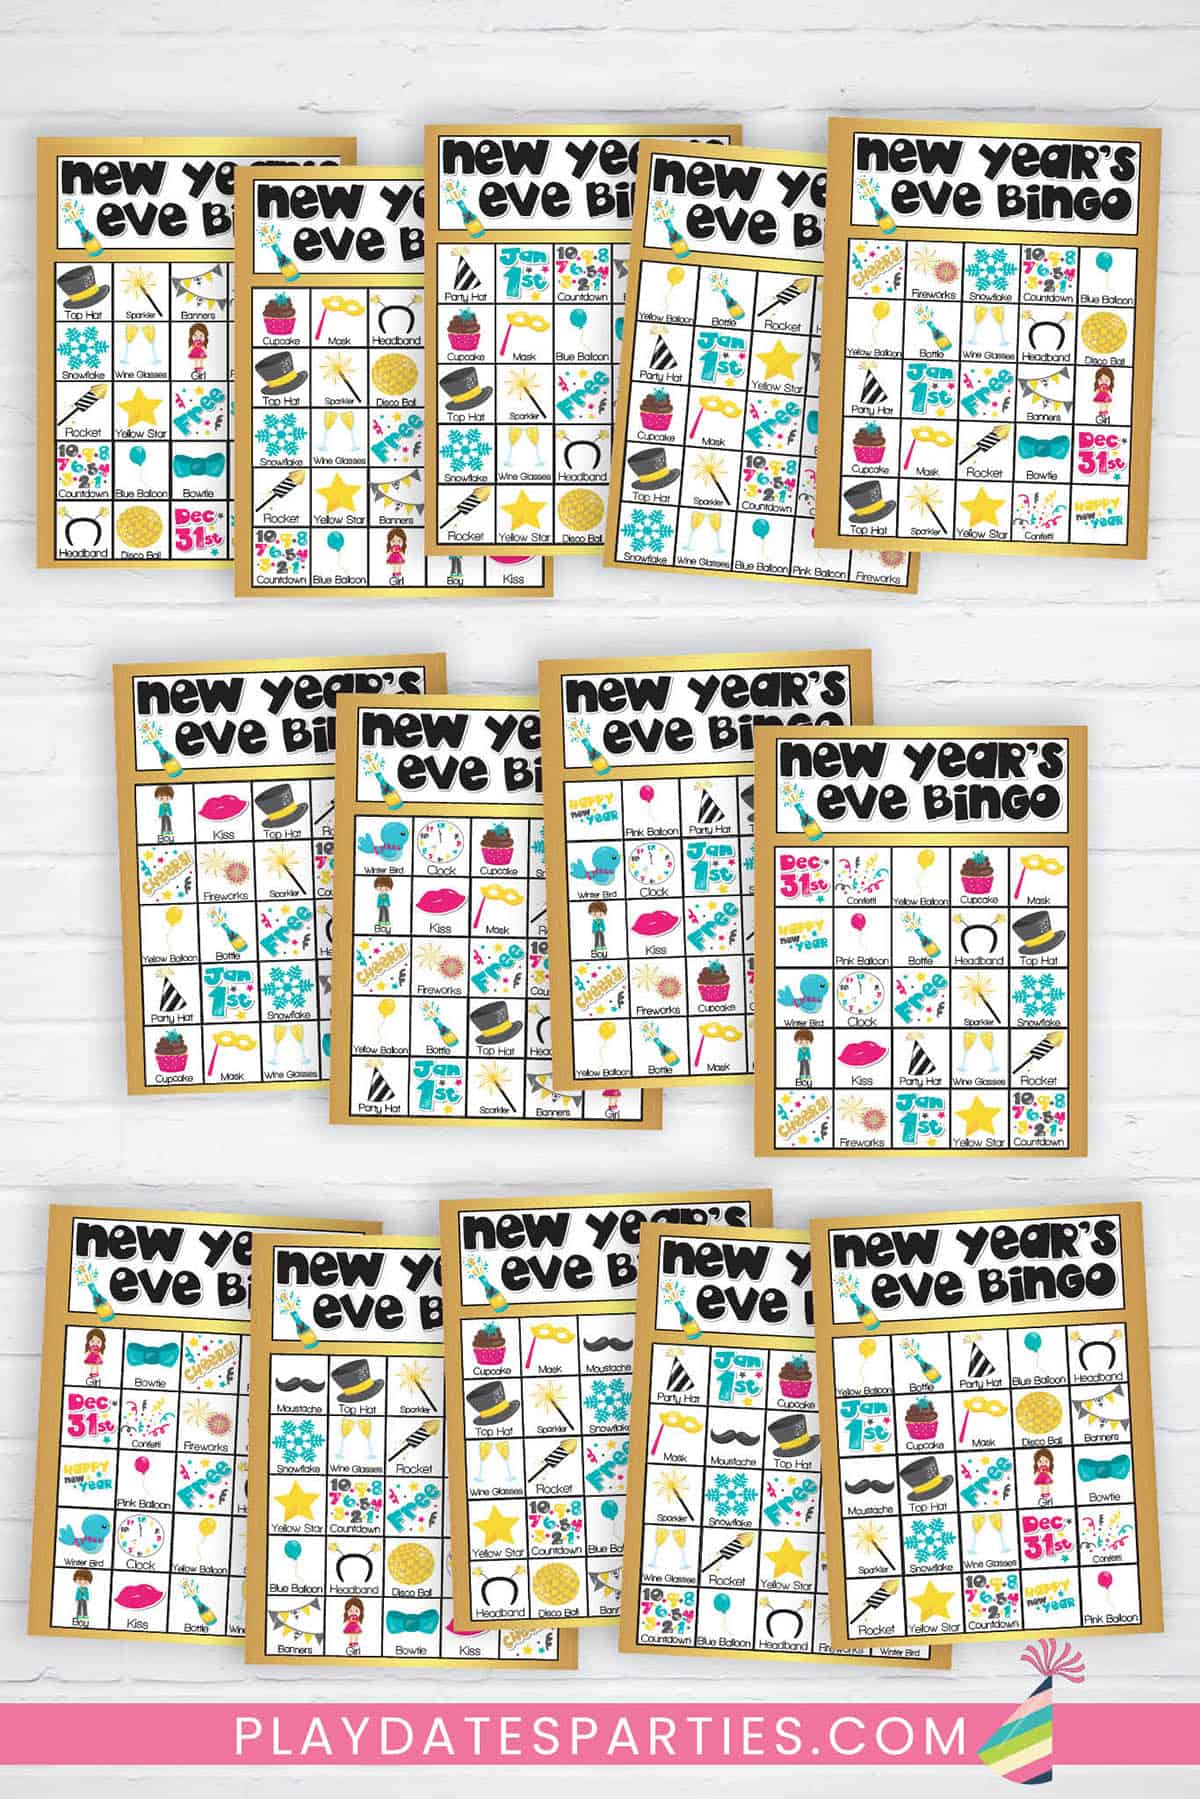 14 colorful New Year's Eve bingo cards against a white brick backgrop.